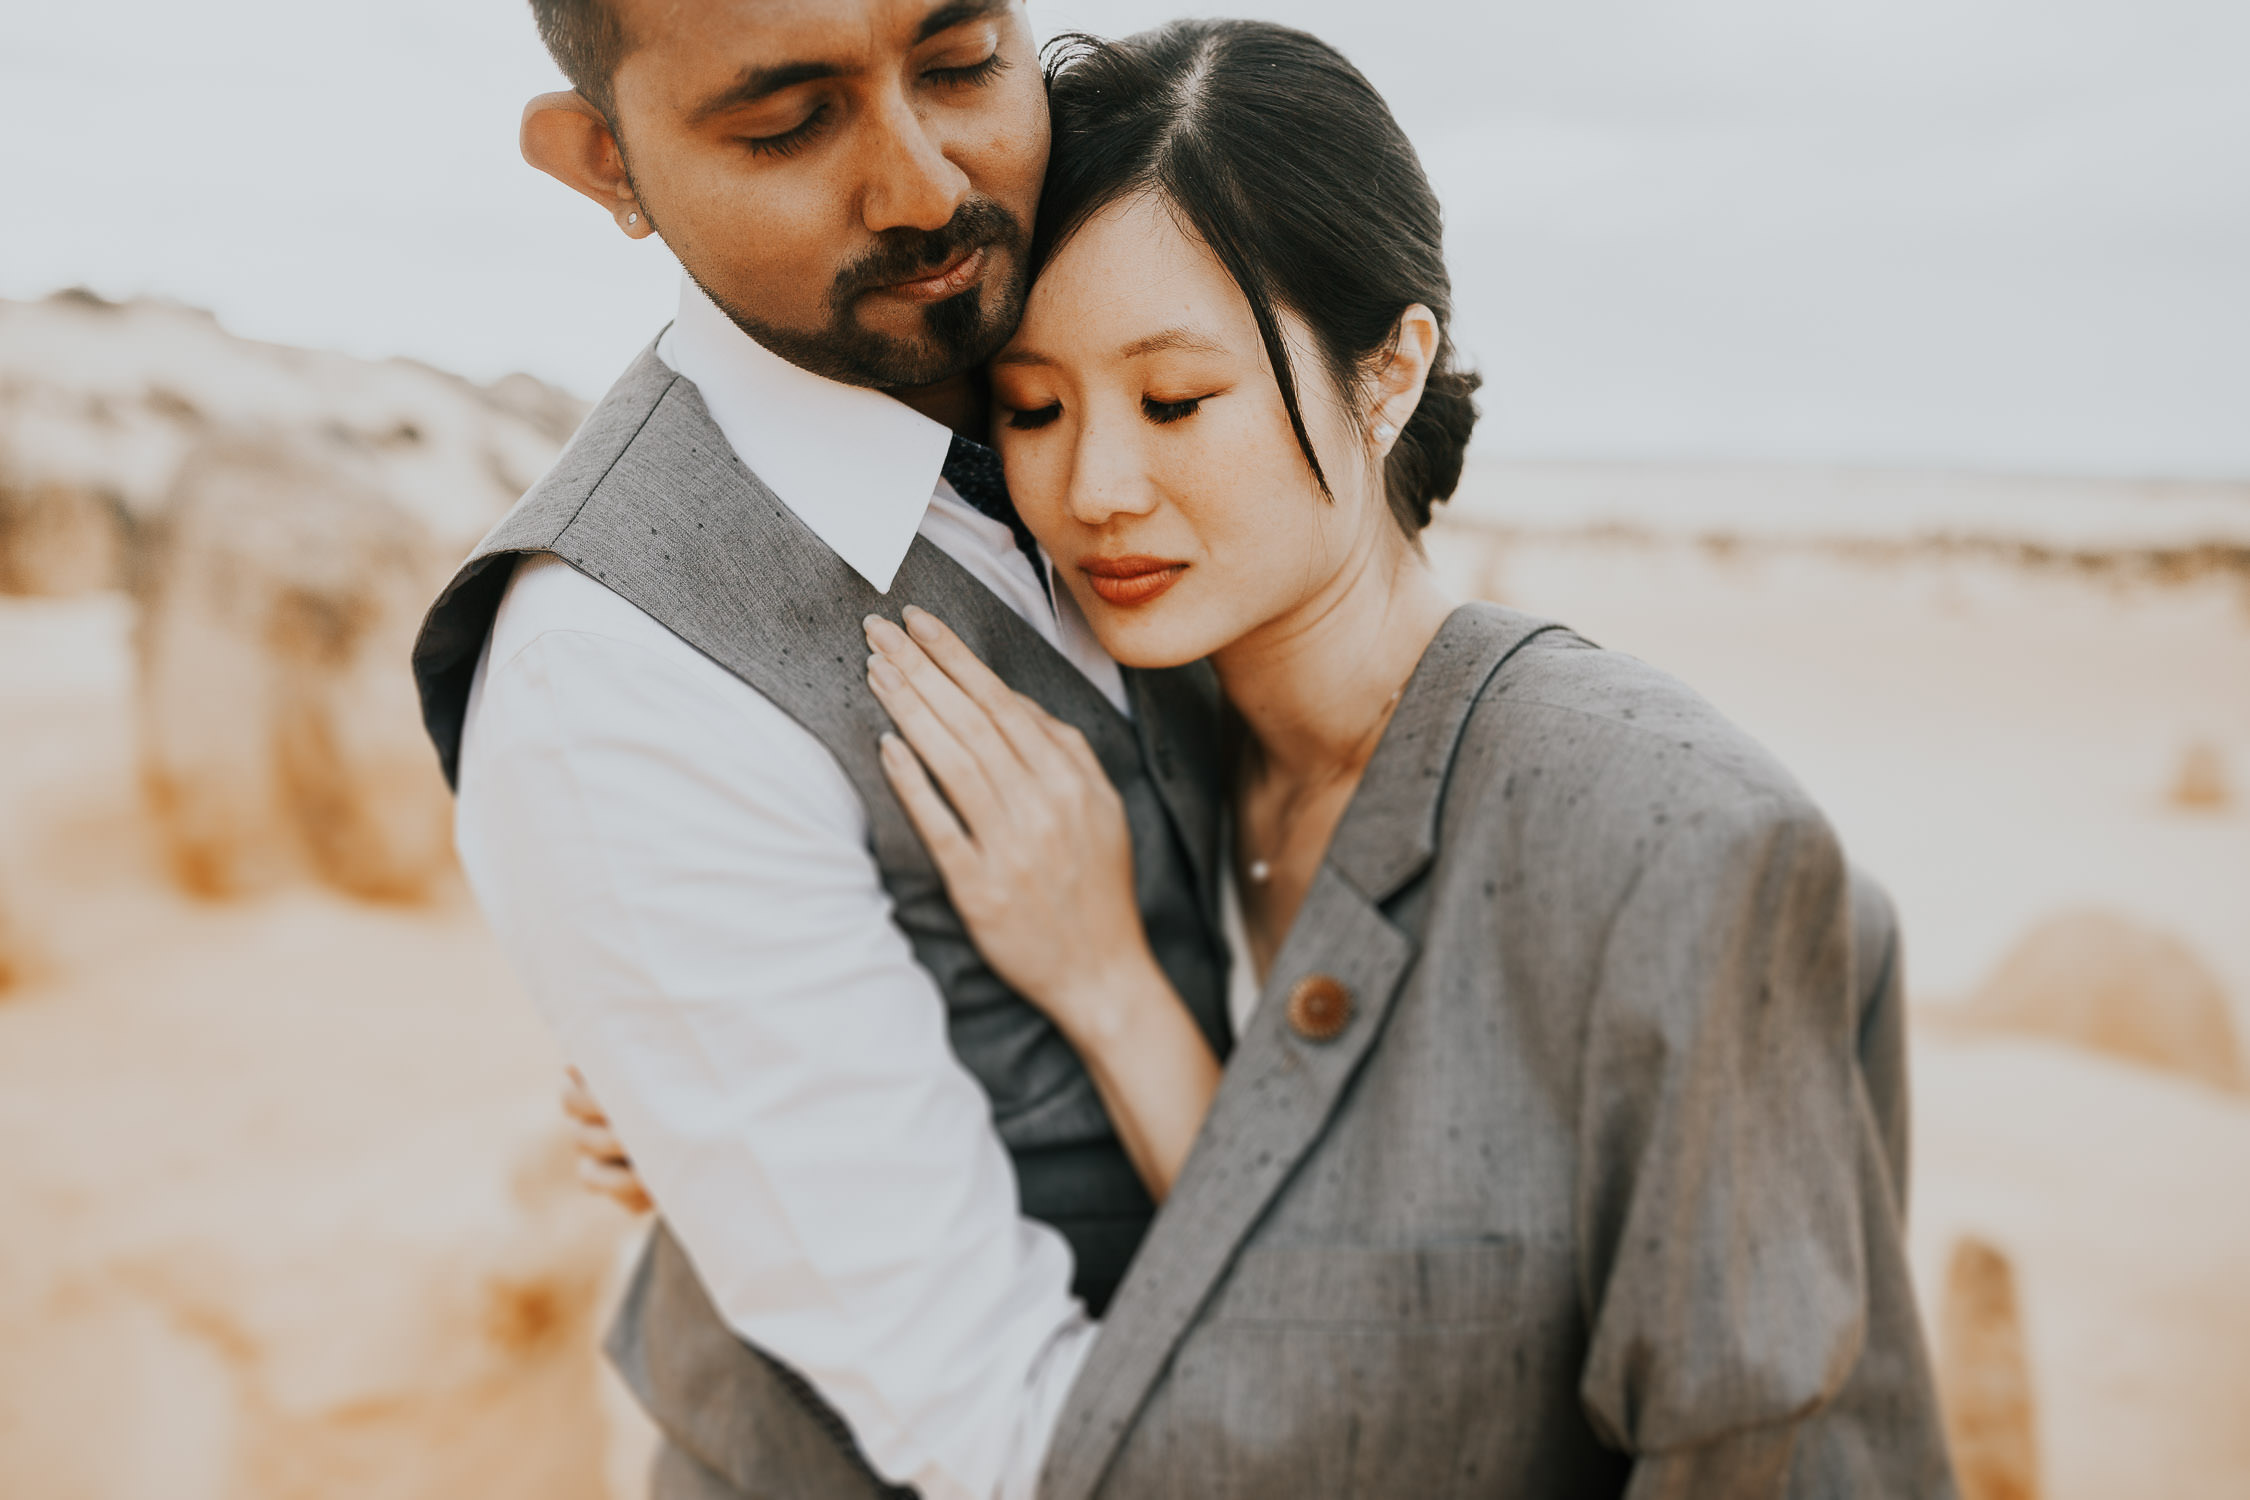 Perth pre-wedding at Lancelin sand dunes, Pinnacles Desert and forest by Naz on OneThreeOneFour 10